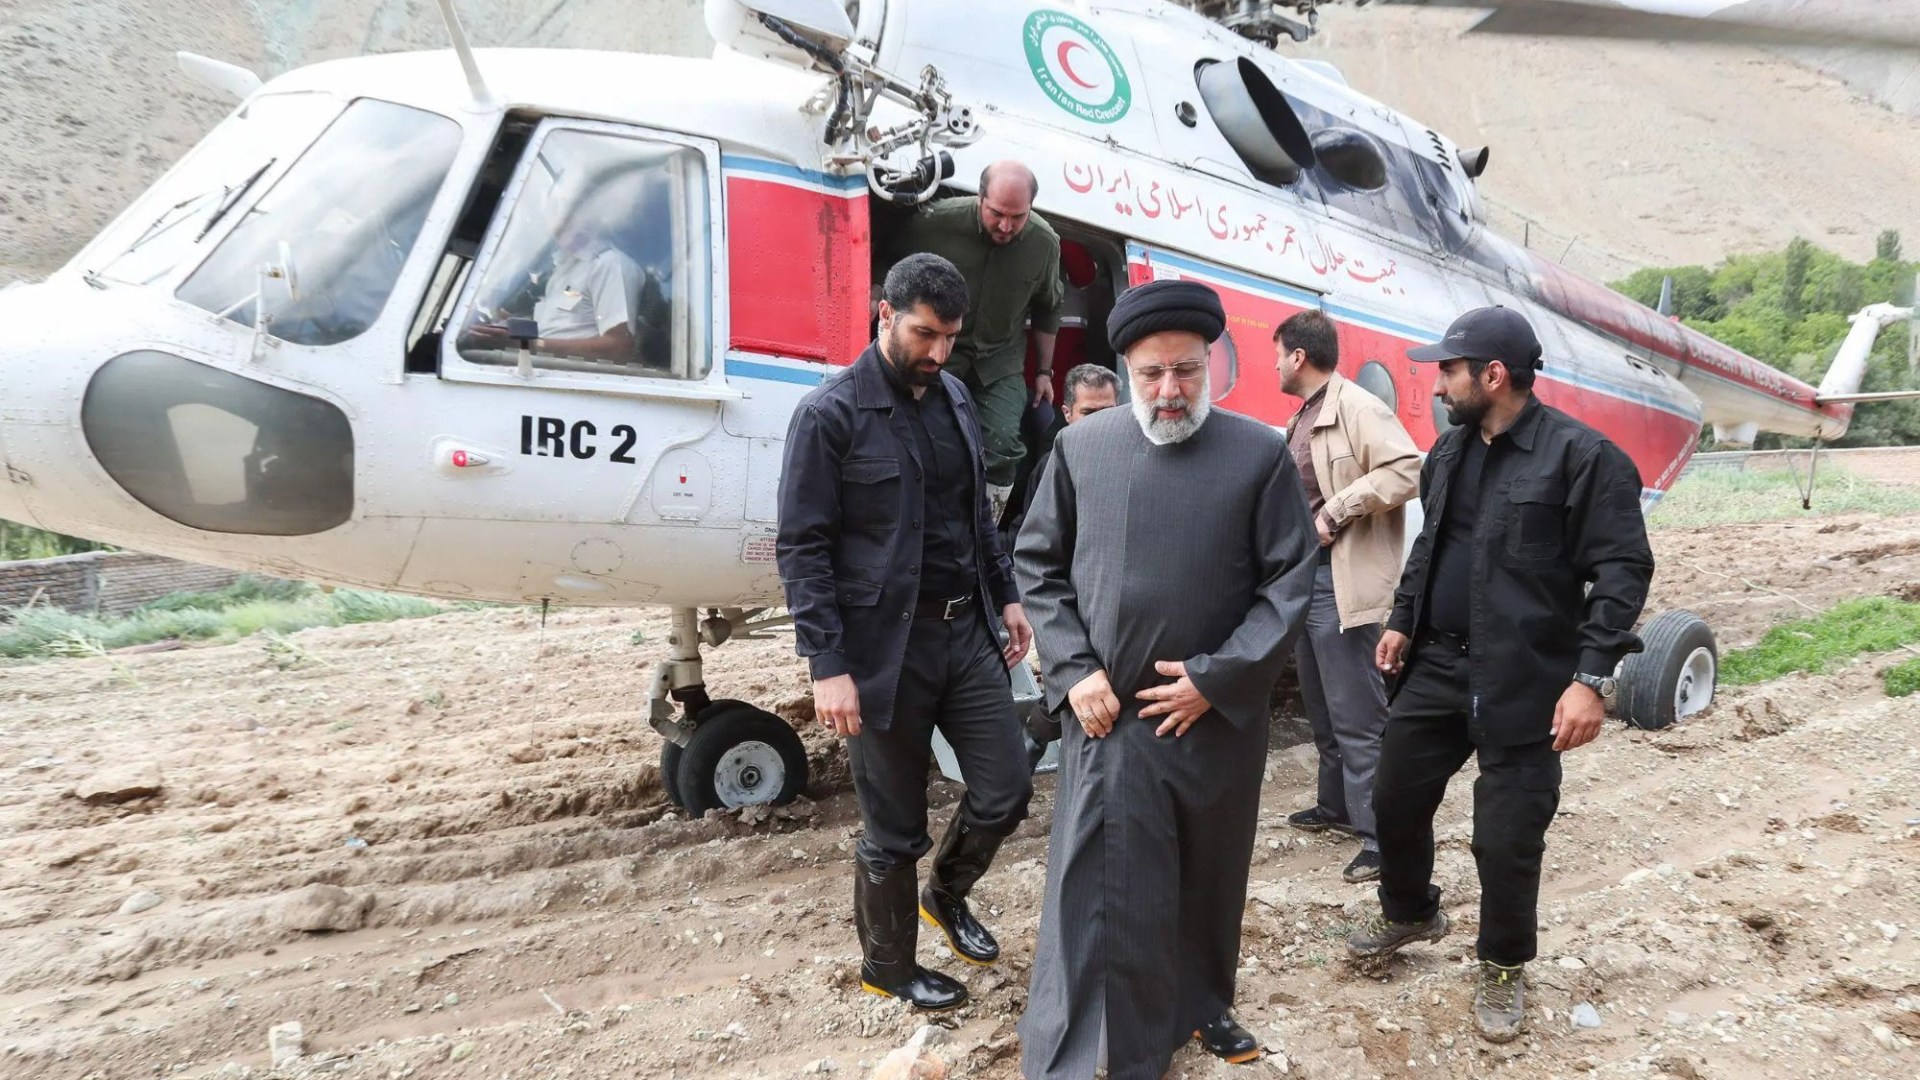 Iranian president Ebrahim Raisi ‘missing’ after helicopter in convoy ‘crashes’ sparking massive search operation [Video]